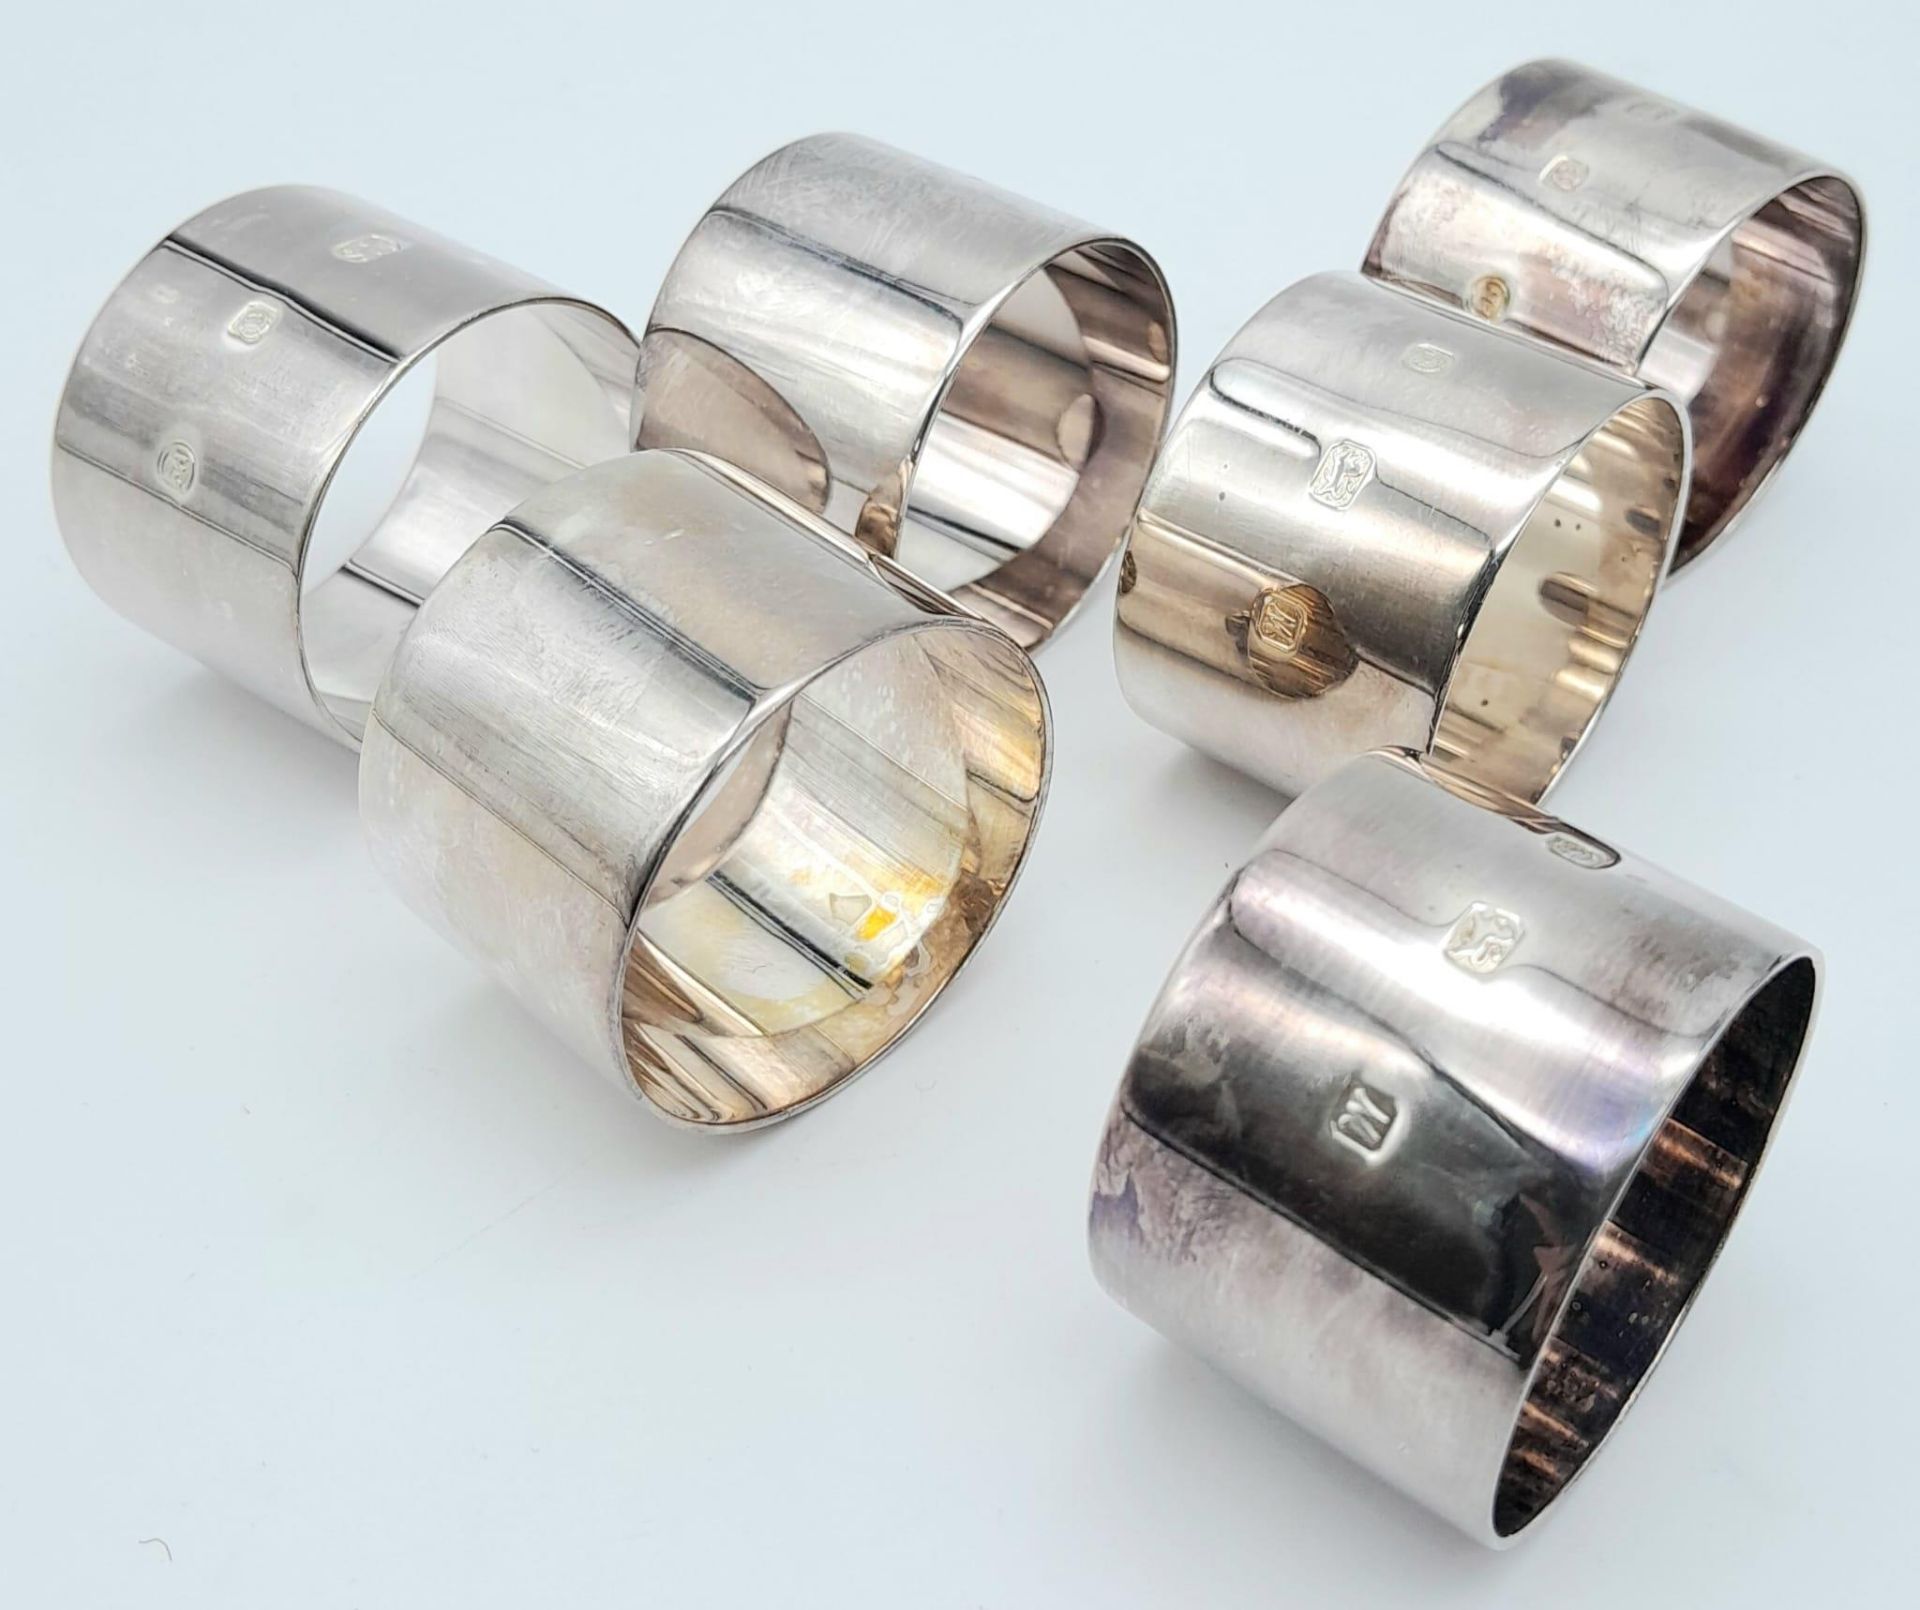 Six 925 Sterling Silver Napkin Rings - Hallmarks for Sheffield 1986. 219g total weight. Comes with a - Bild 3 aus 6